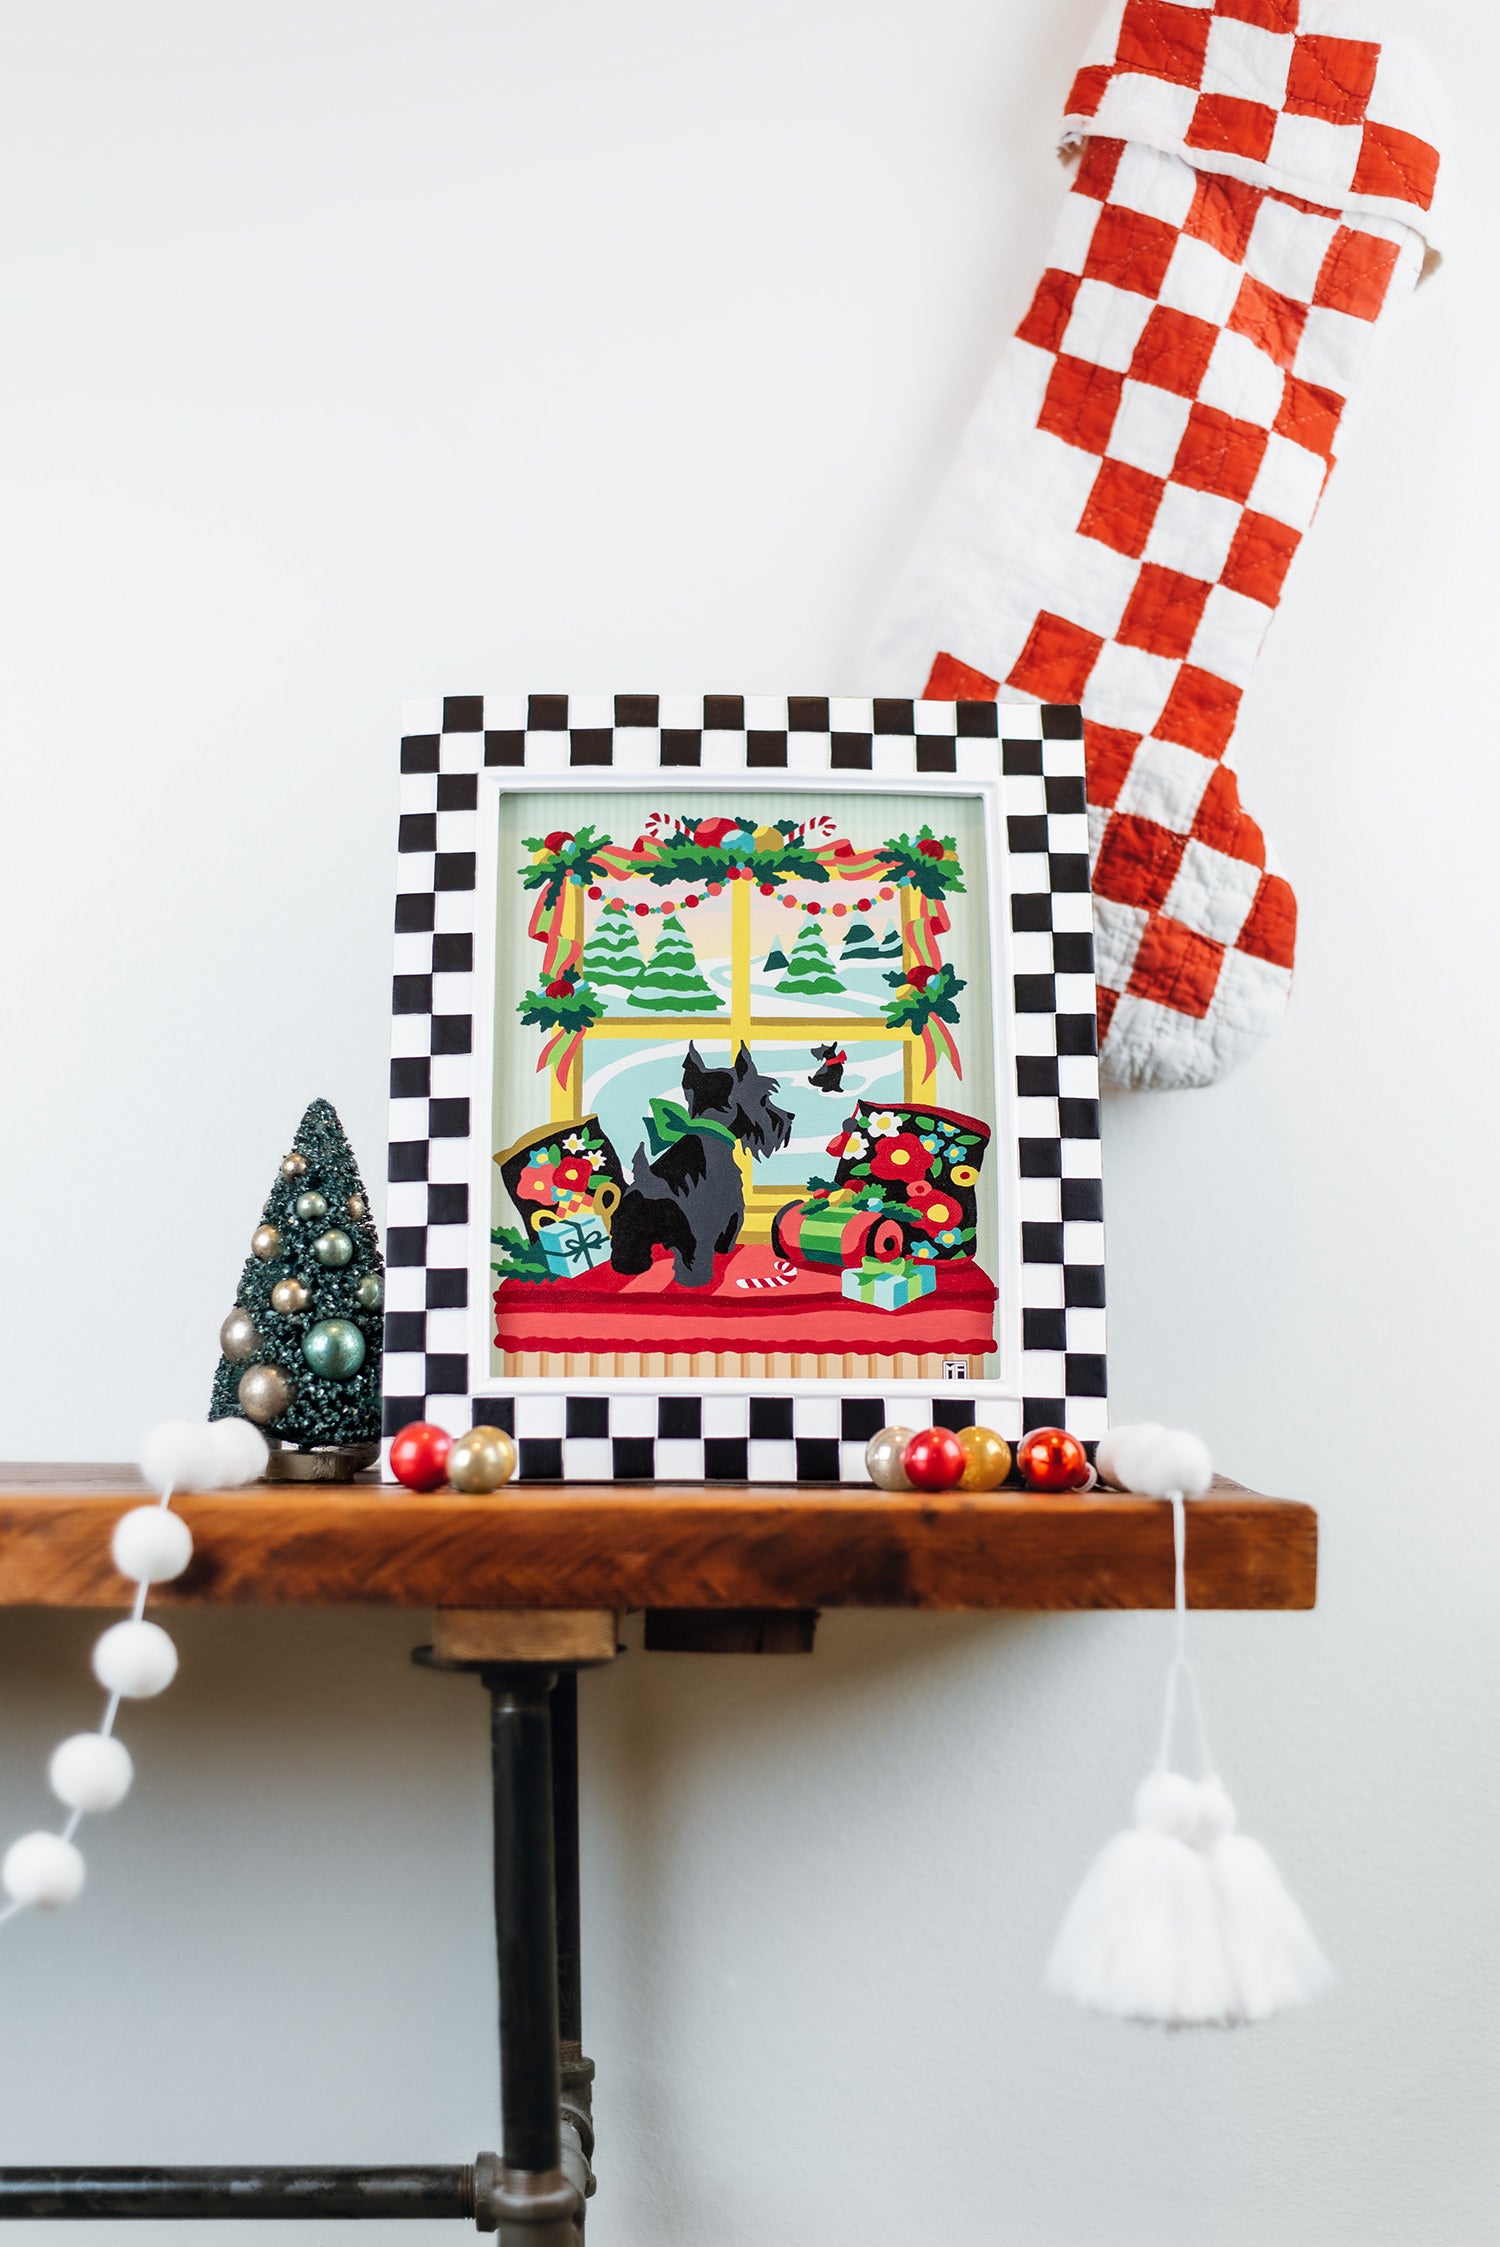 Happy Paw-lidays | Mary Engelbreit 8x10 paint-by-number kit - Elle Crée